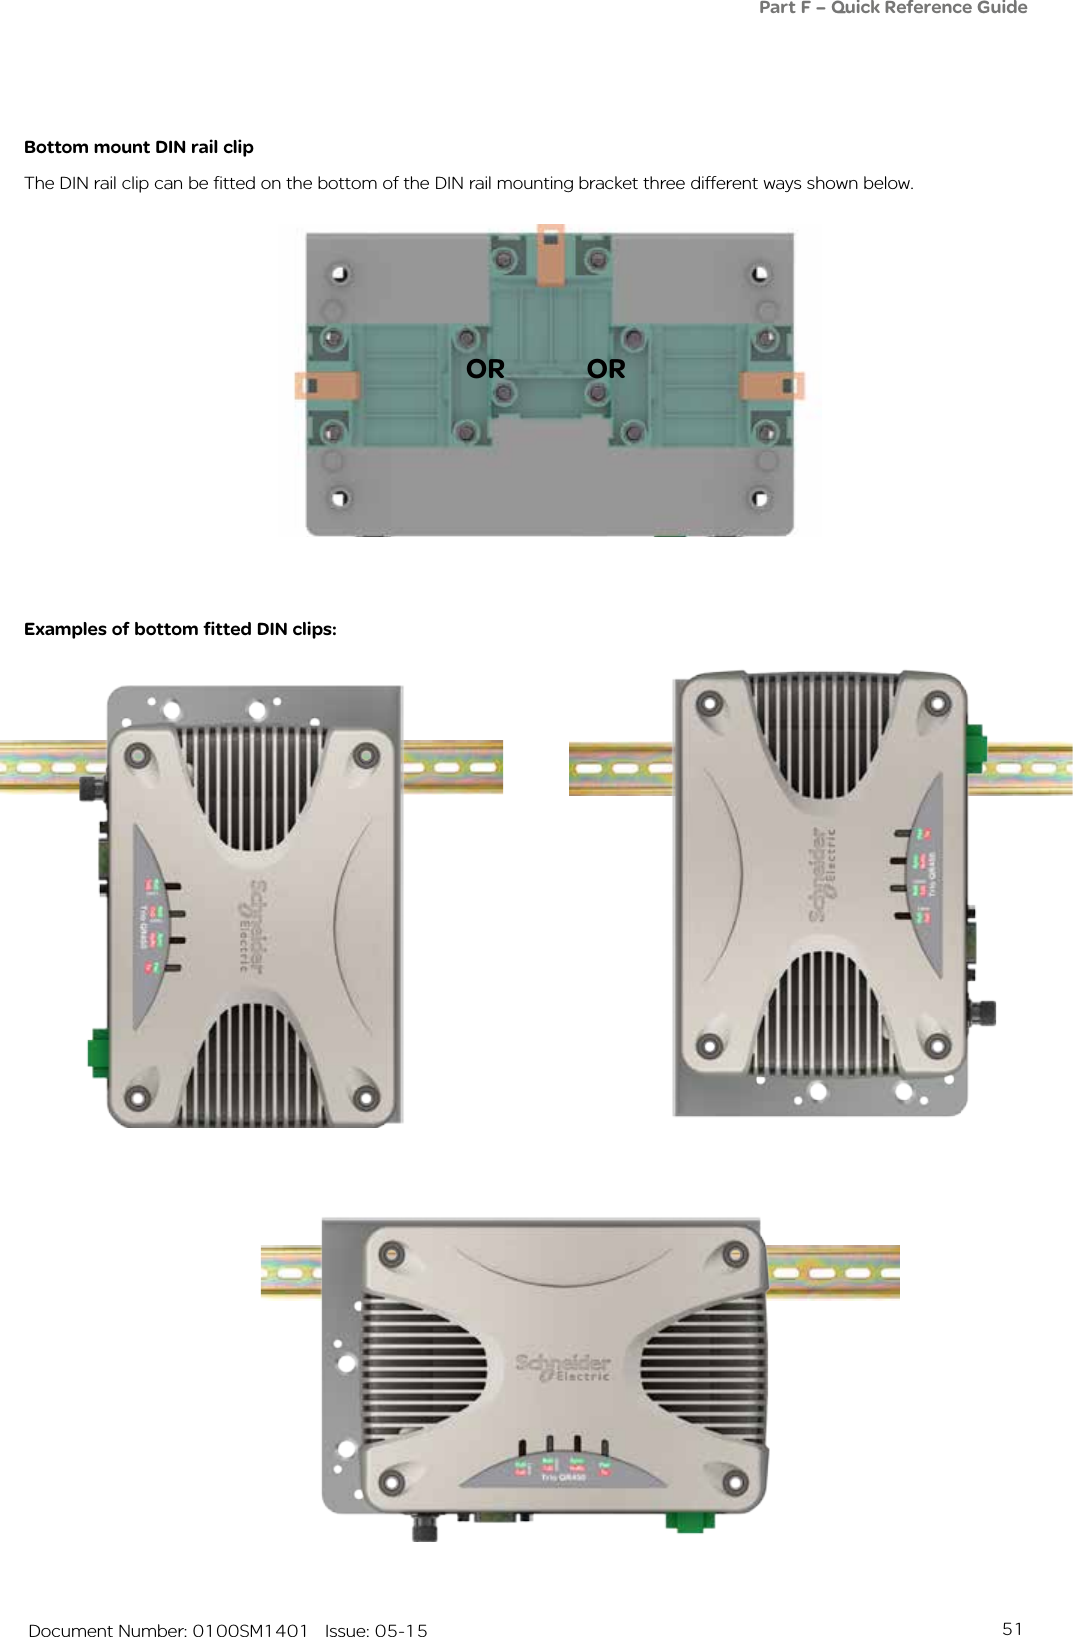 51   Document Number: 0100SM1401   Issue: 05-15Bottom mount DIN rail clipThe DIN rail clip can be fitted on the bottom of the DIN rail mounting bracket three different ways shown below.ORExamples of bottom fitted DIN clips:ORPart F – Quick Reference Guide